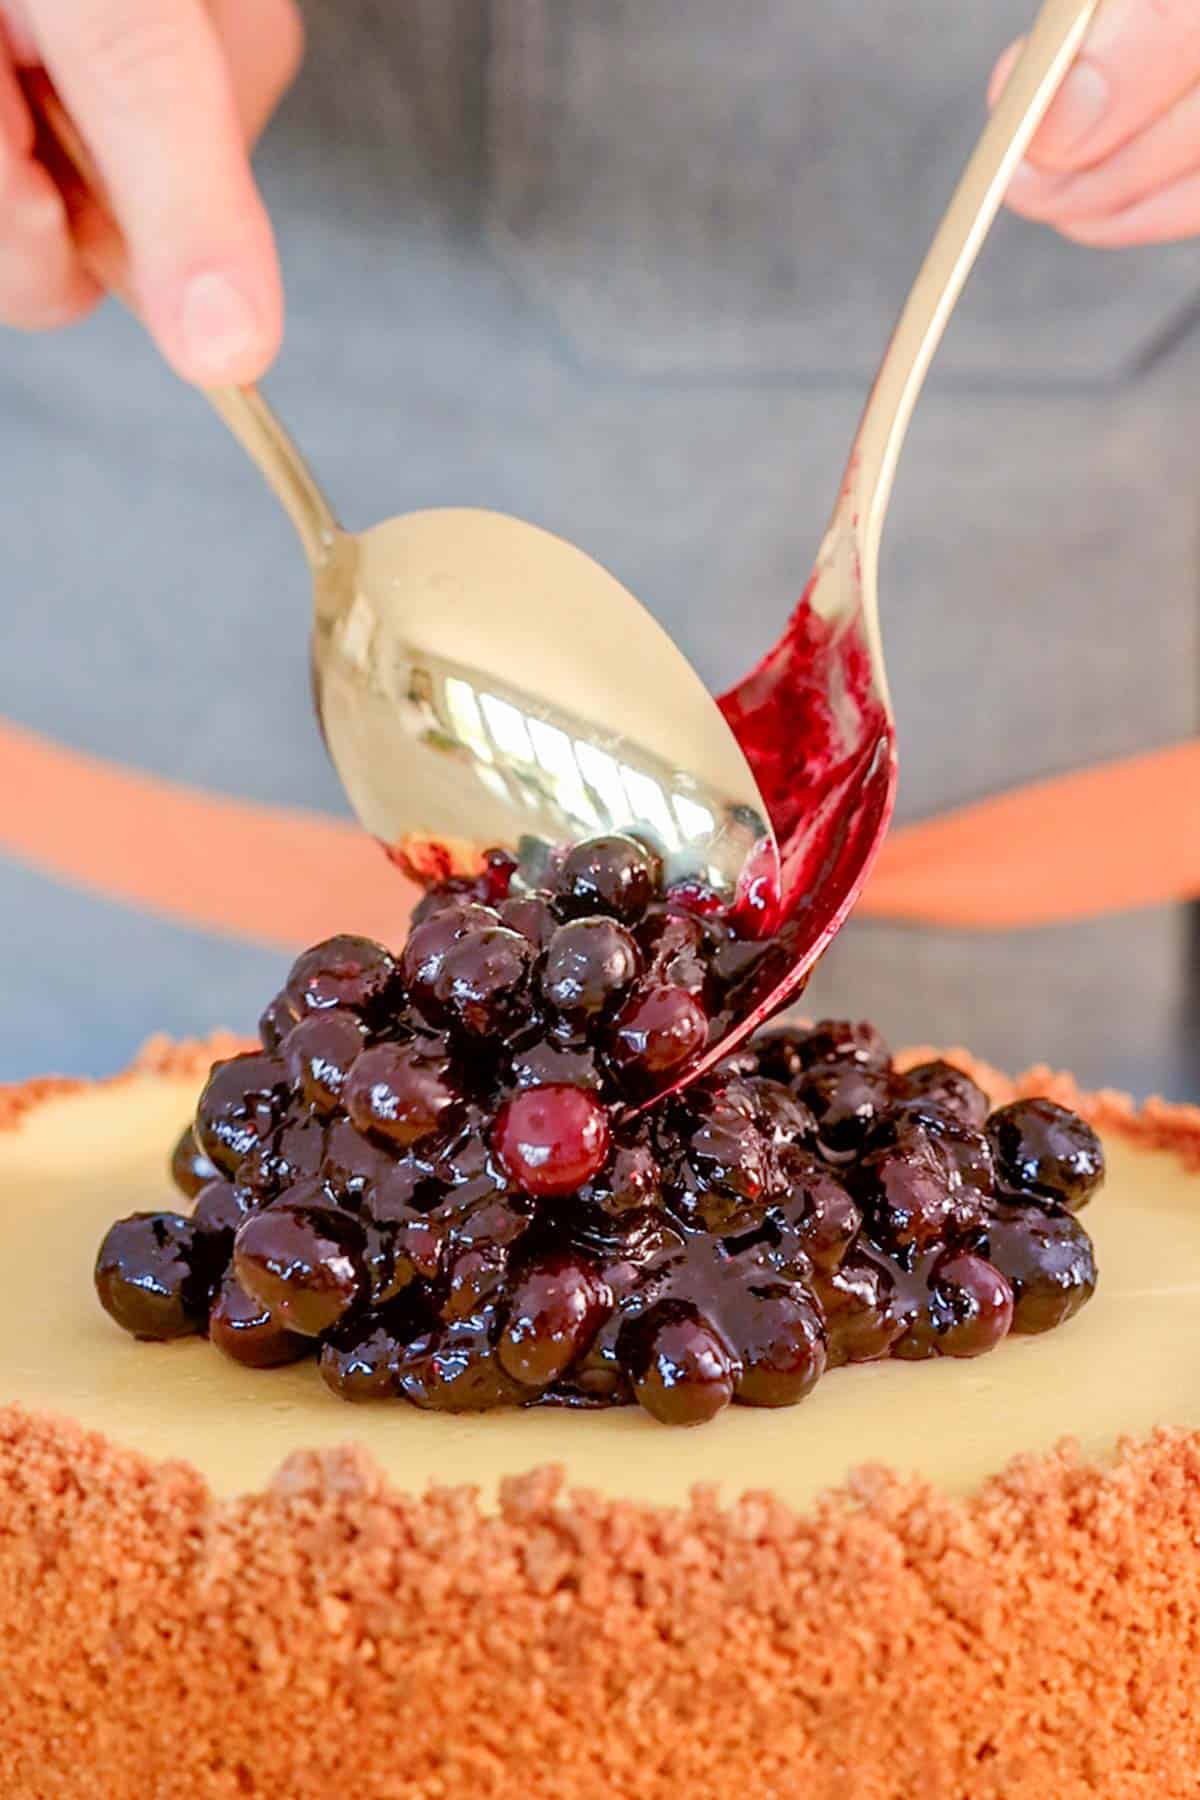 Blueberry sauce spooned on top of a blueberry cheesecake.